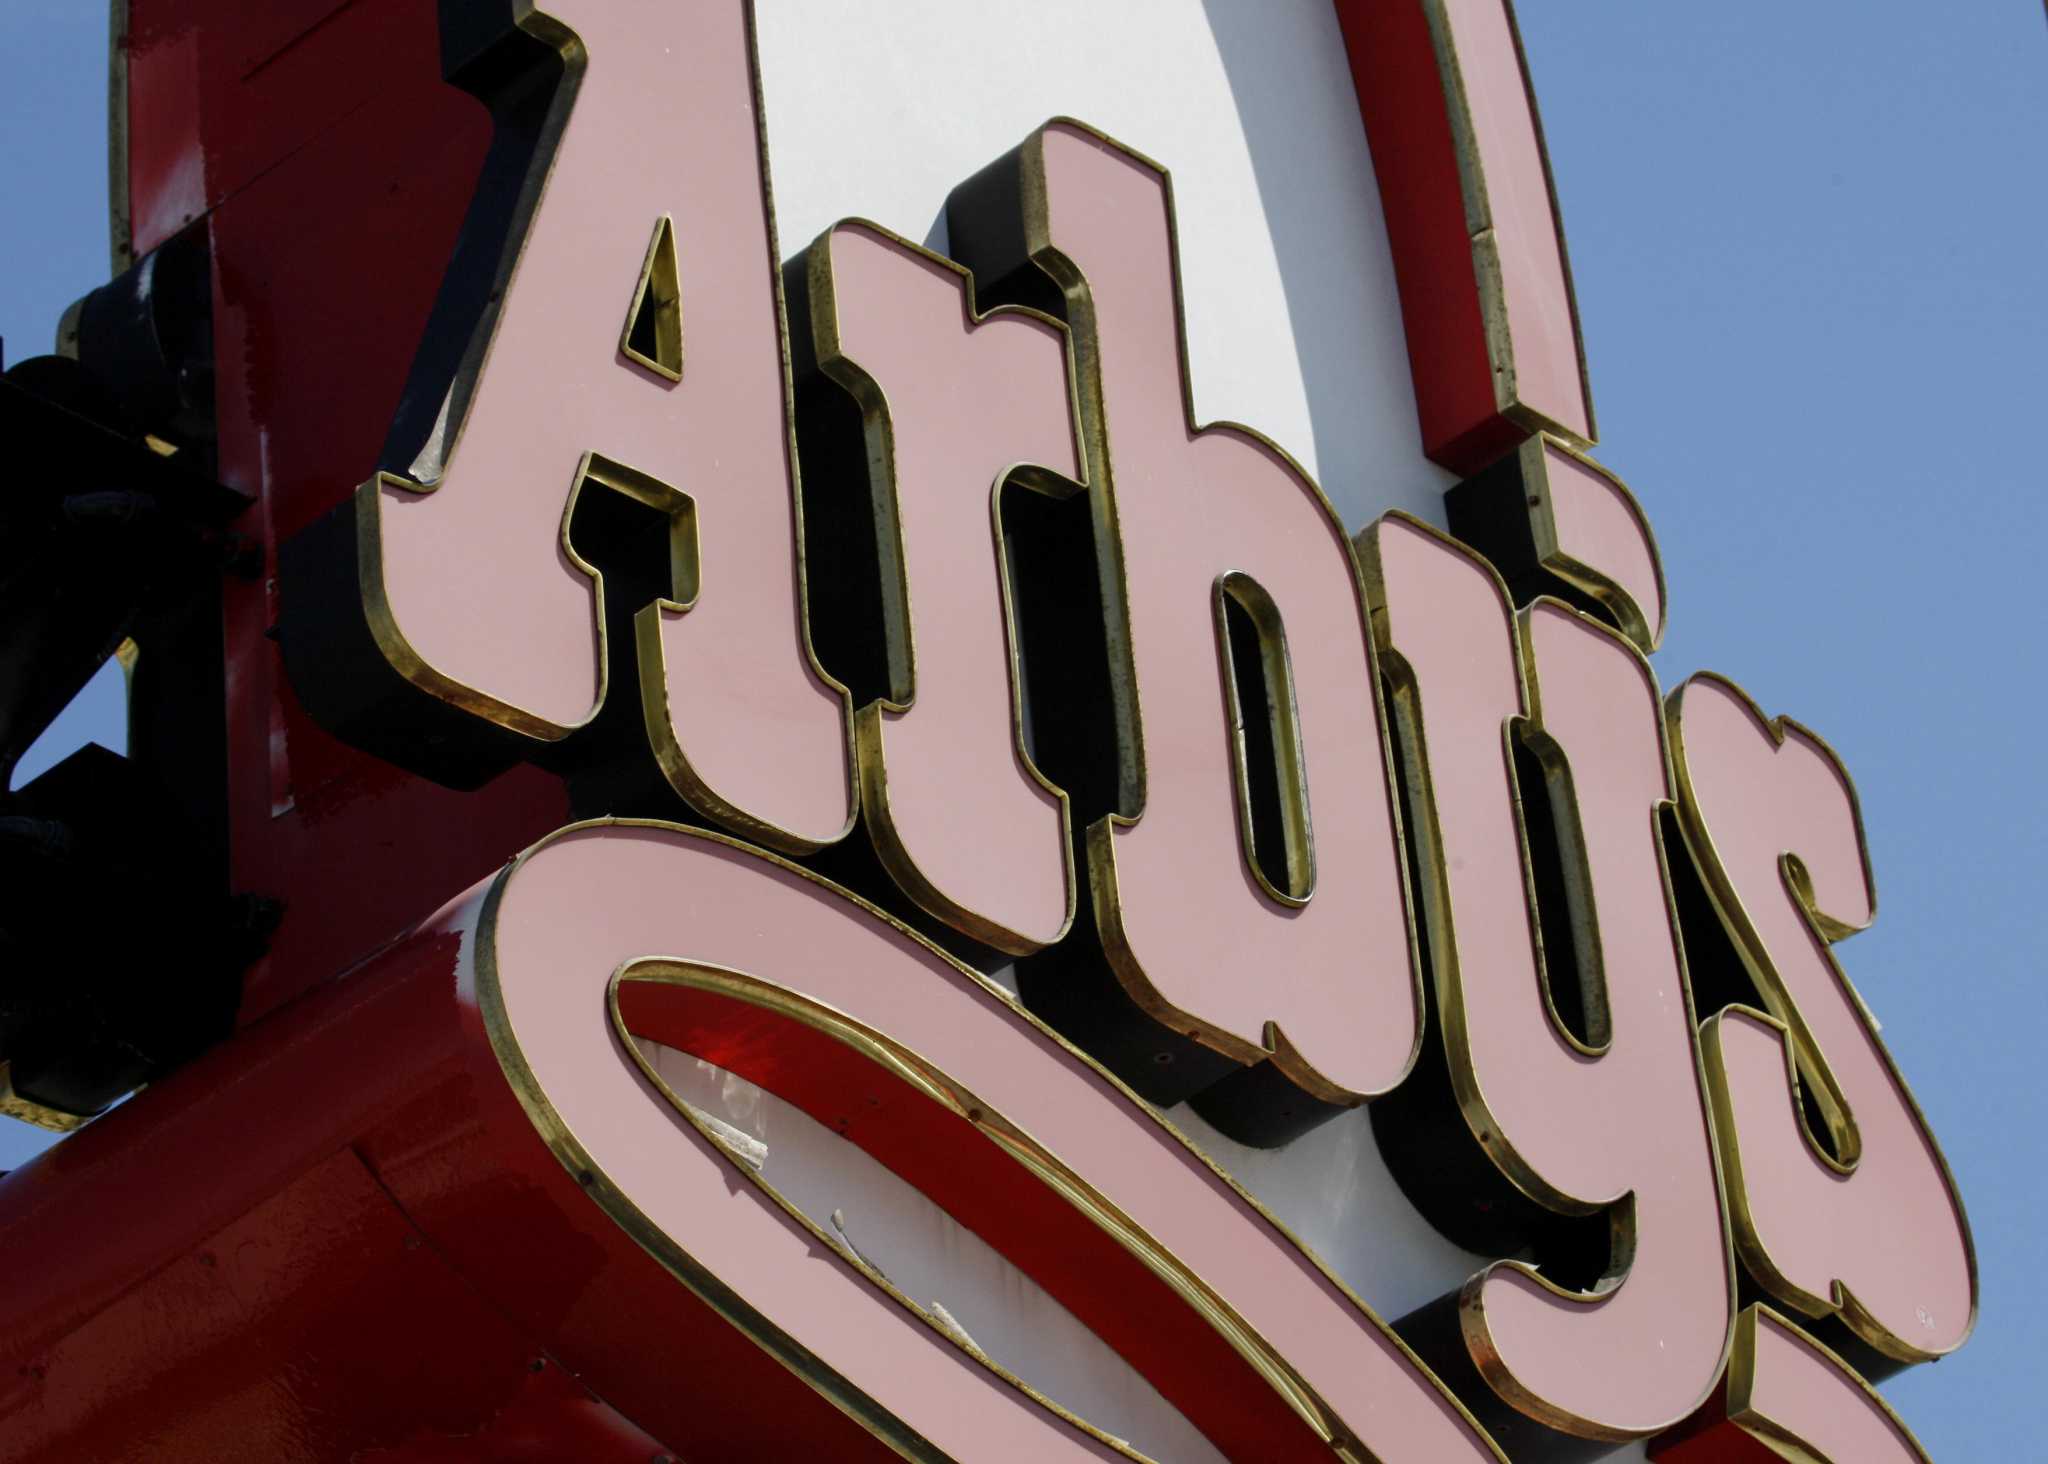 What’s New Arby’s announced for Lumberton